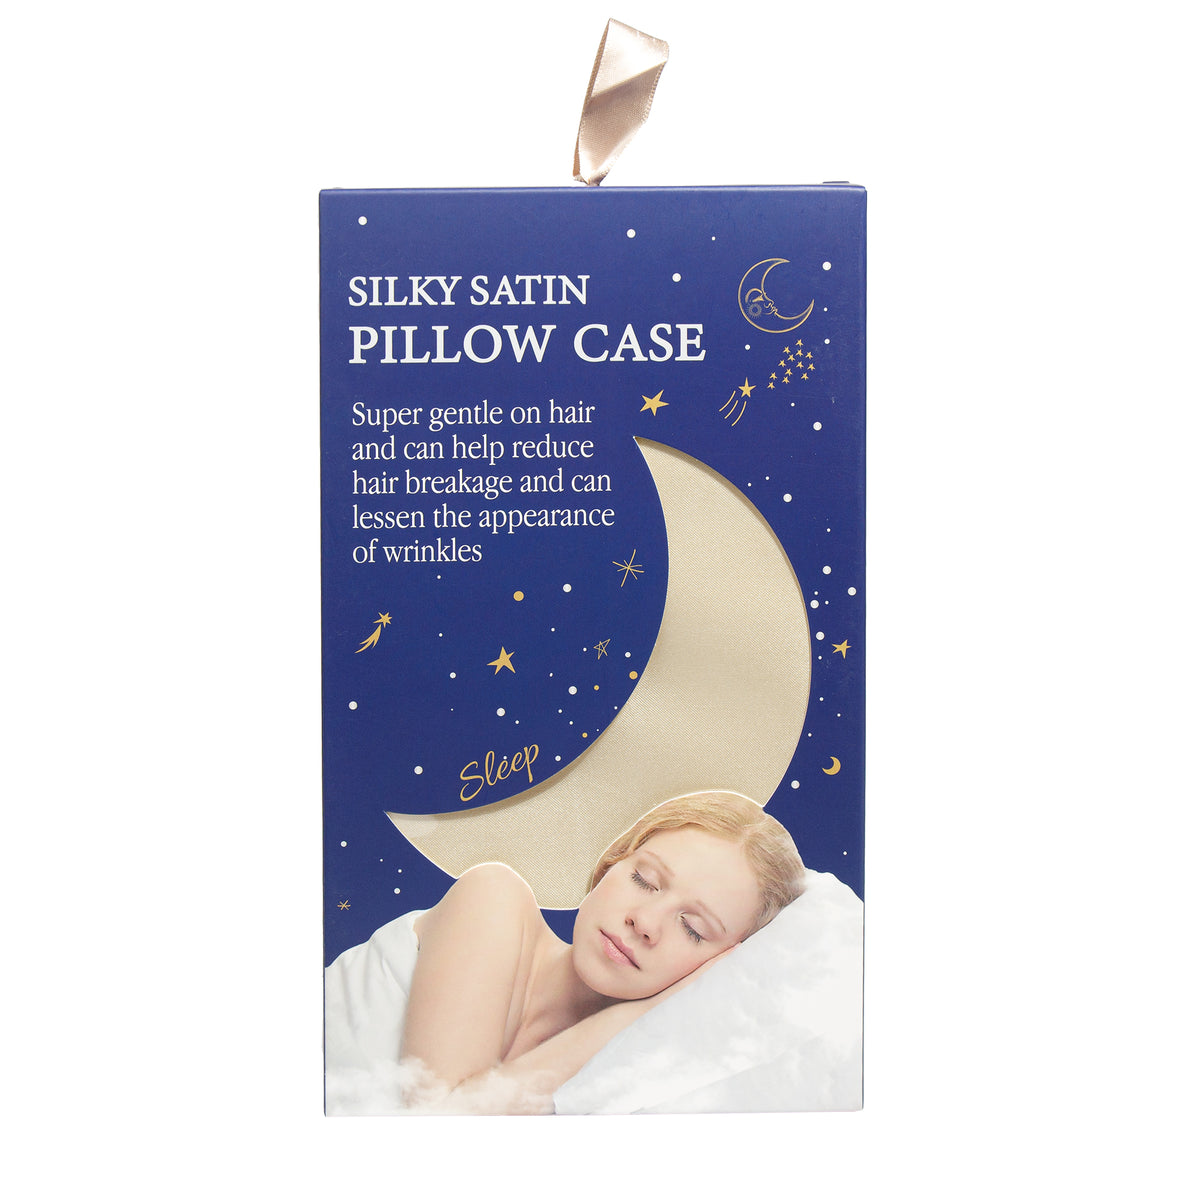 Primary Image of Gold Silky Satin Pillowcase